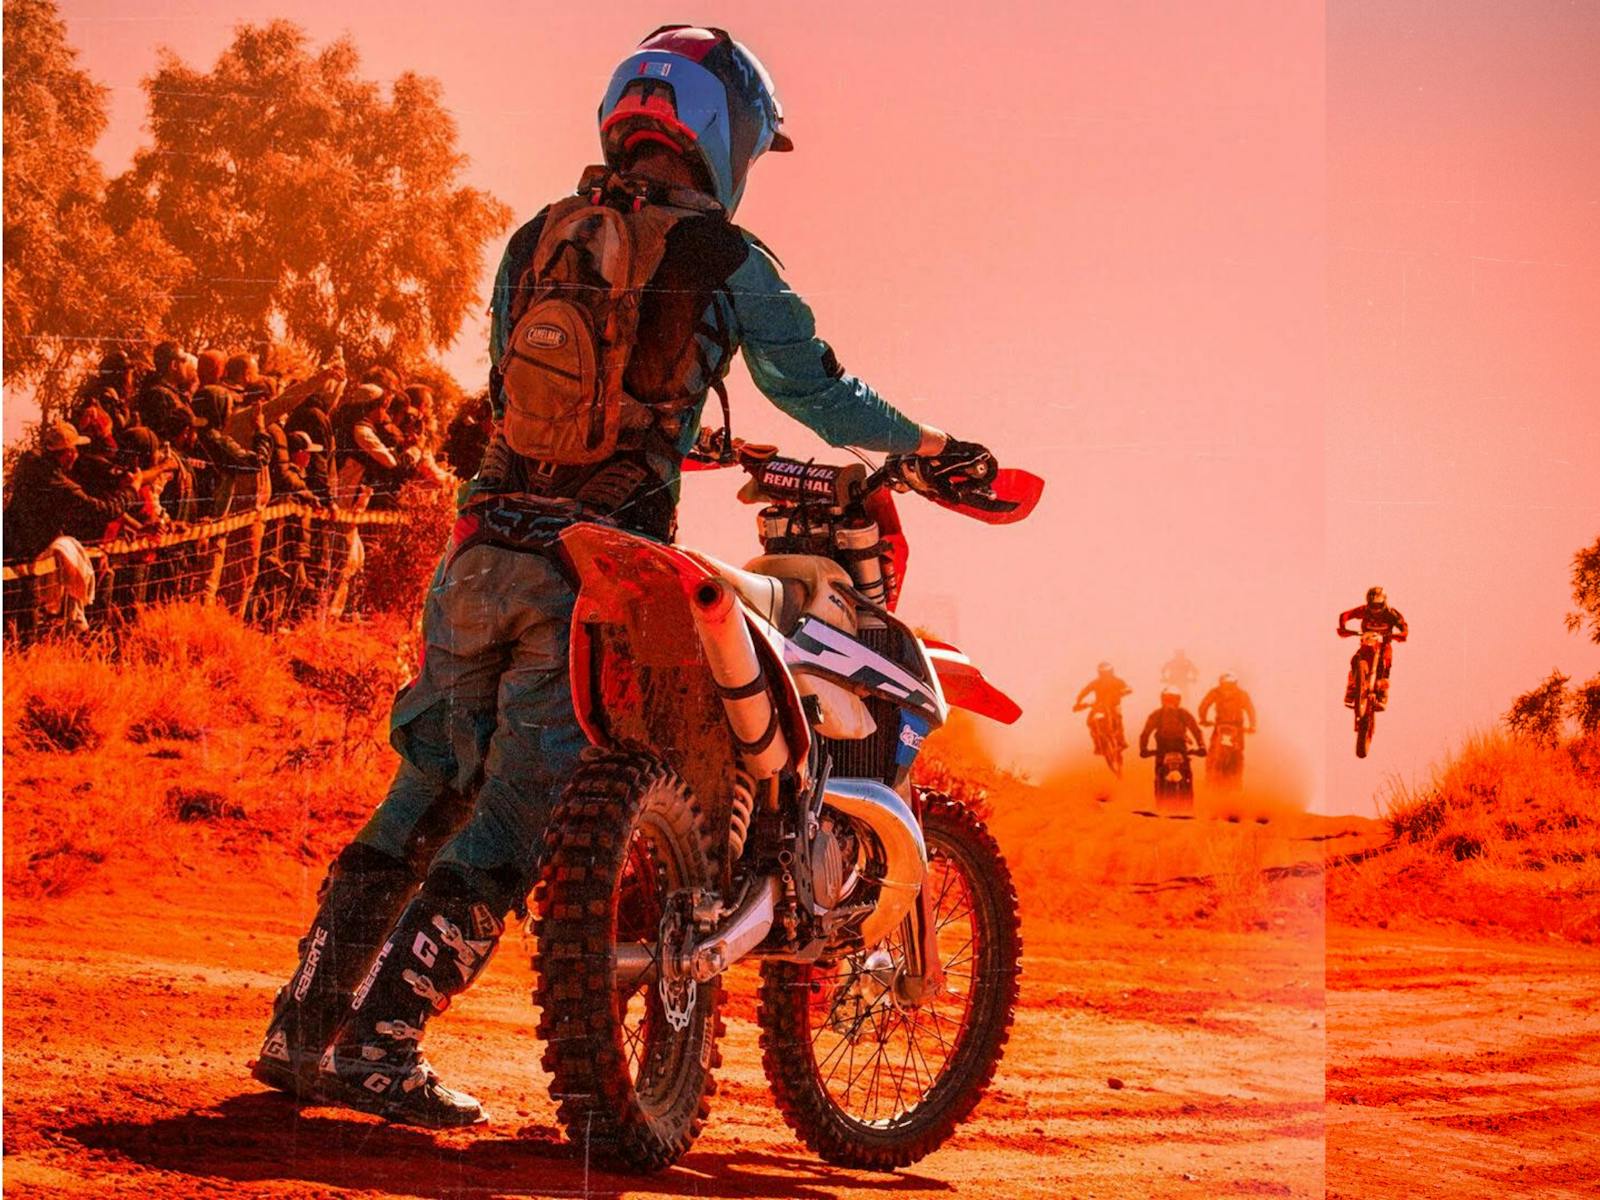 Image for Finke: There and Back - Coffs Harbour, presented by Harley-Davidson